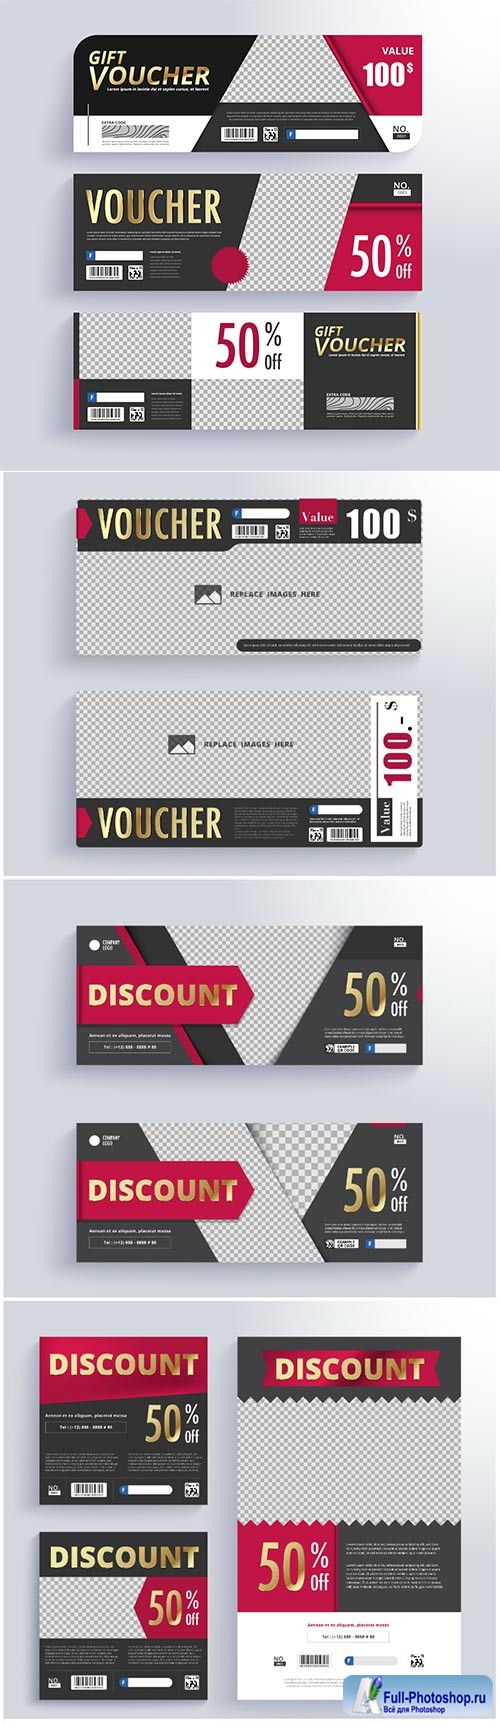 Gift voucher vector template, blank space for images